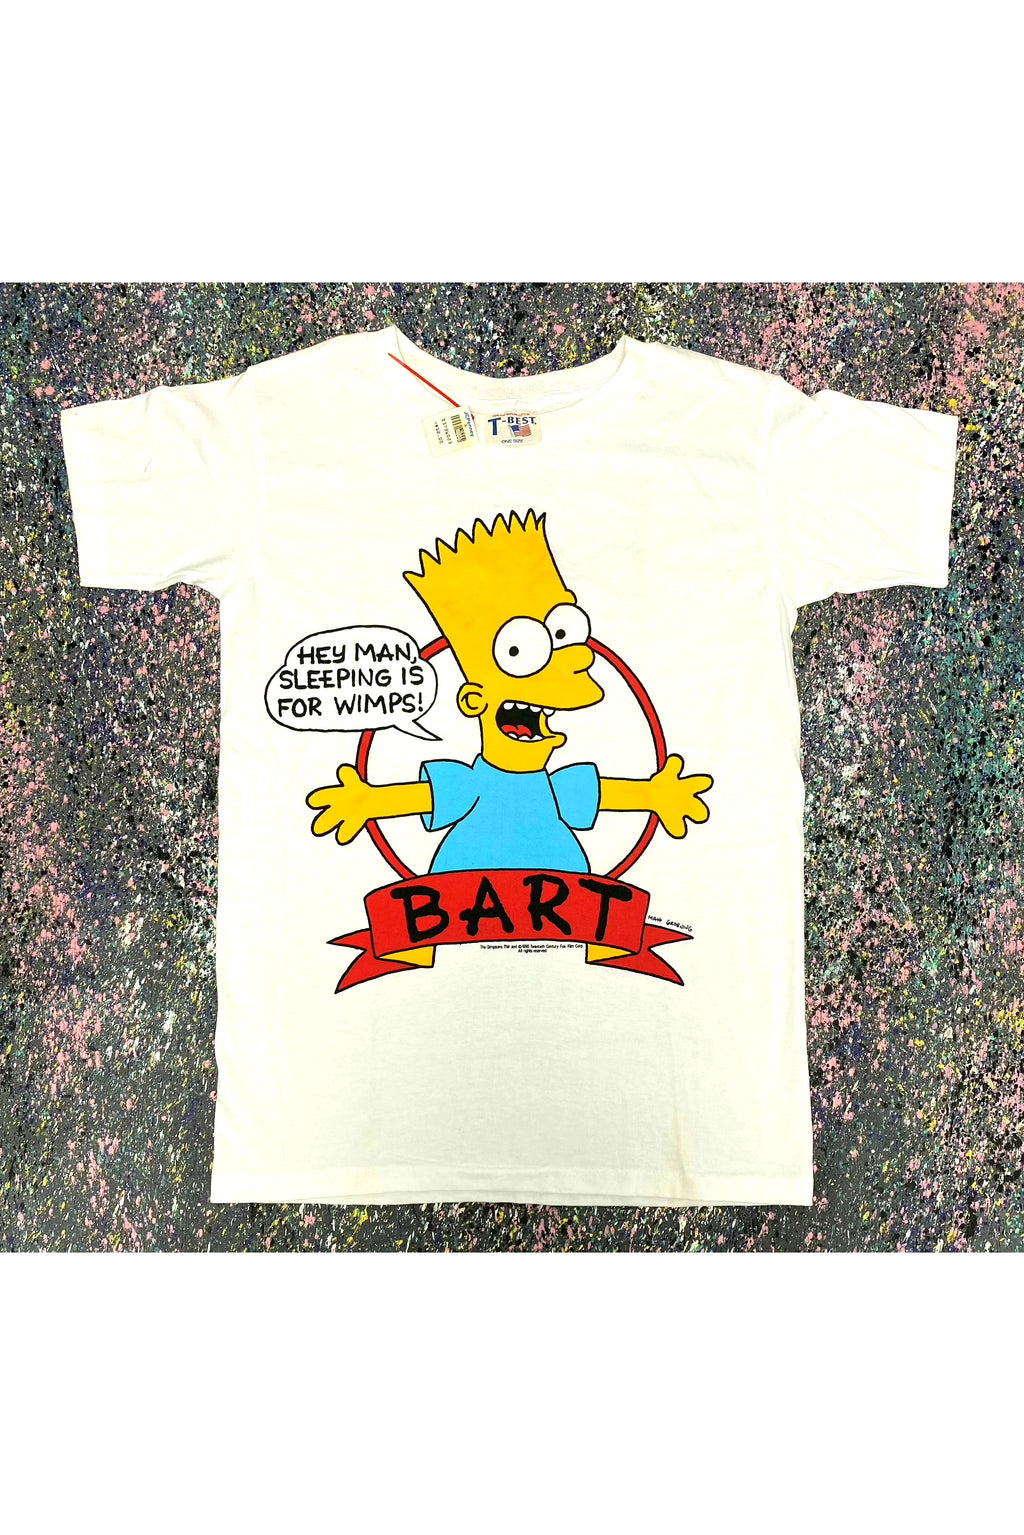 Vintage 1990 The Simpson Bart Hey Man, Sleep Is For Wimps! Dead stock Tee- L